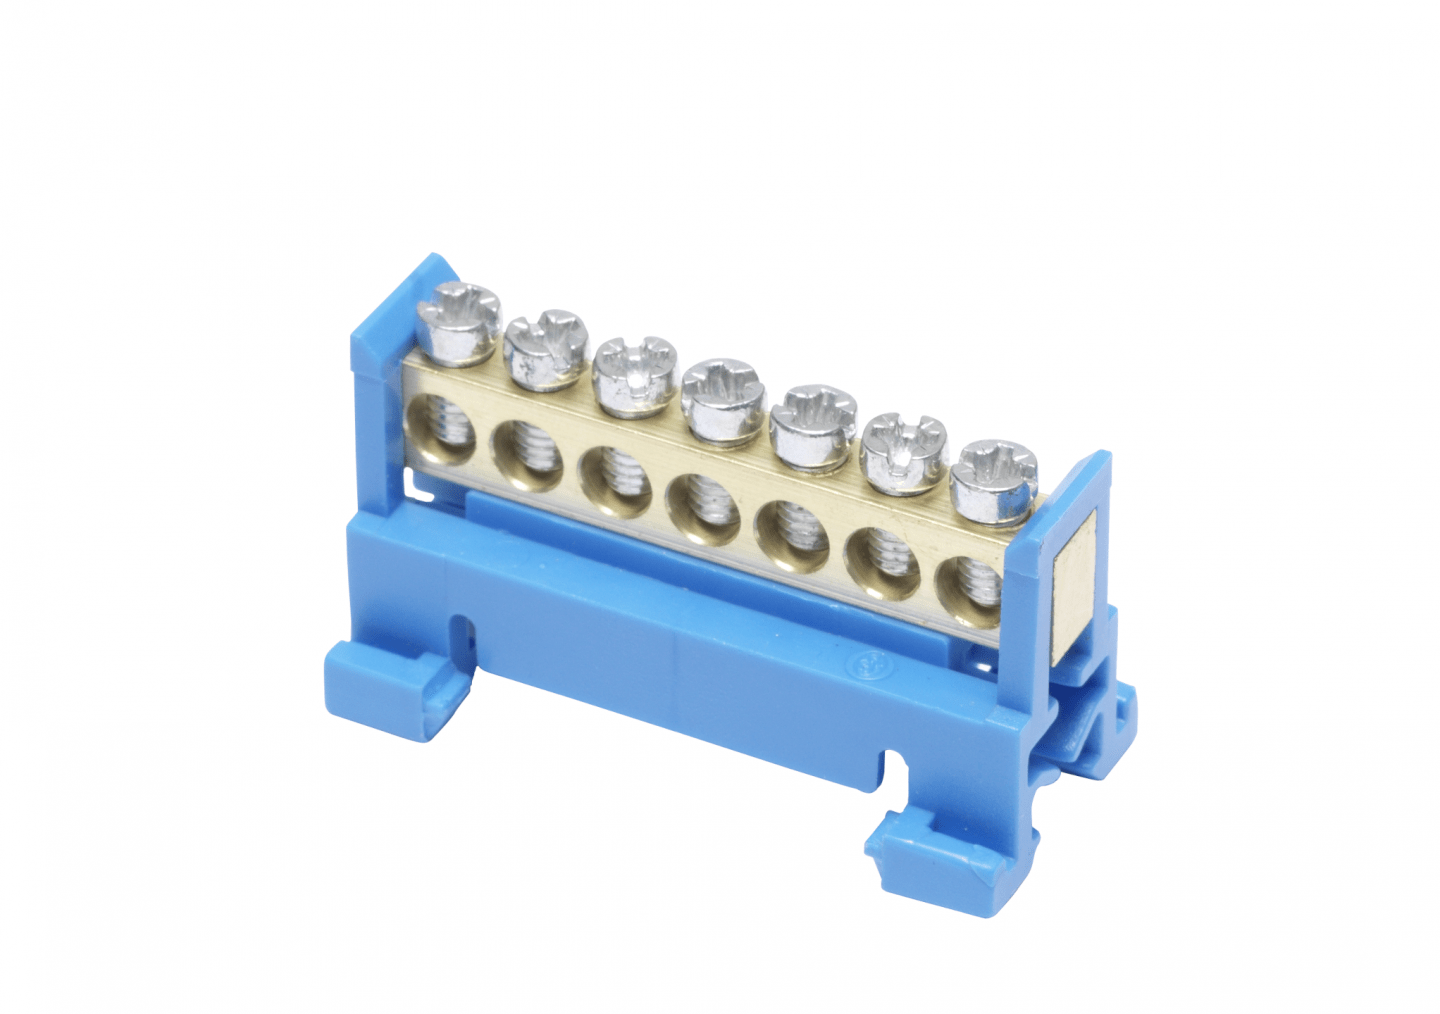 Neutral conductor rail with blue holder and 7 terminal points